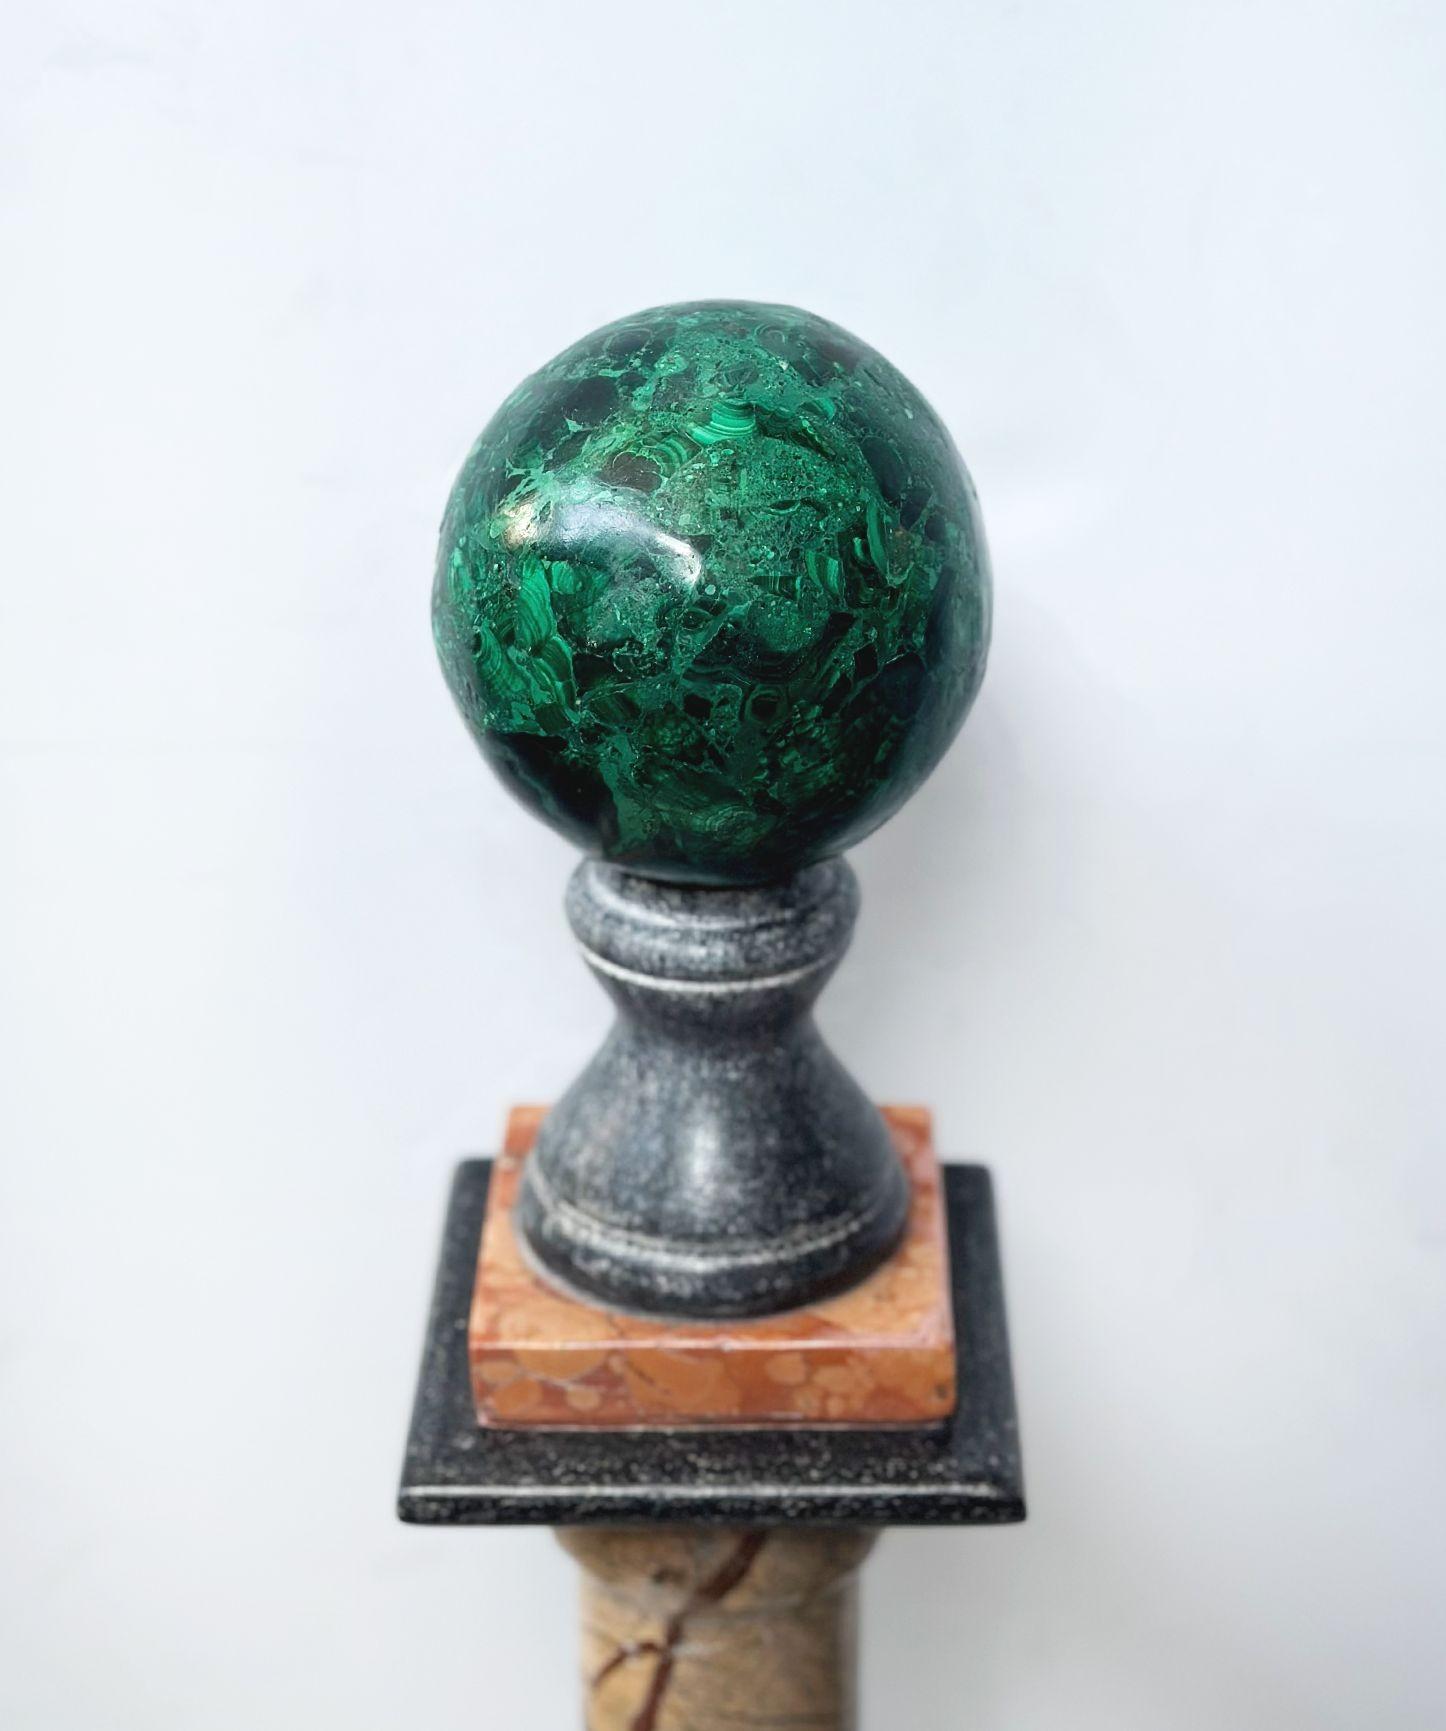 Pair of Neoclassical style column ornaments made of marble and onyx, along with a malachite sphere on top of each piece, while also having a small amethyst on the bottom base.
Made in Italy, 20th Century.
Dimensions:
26